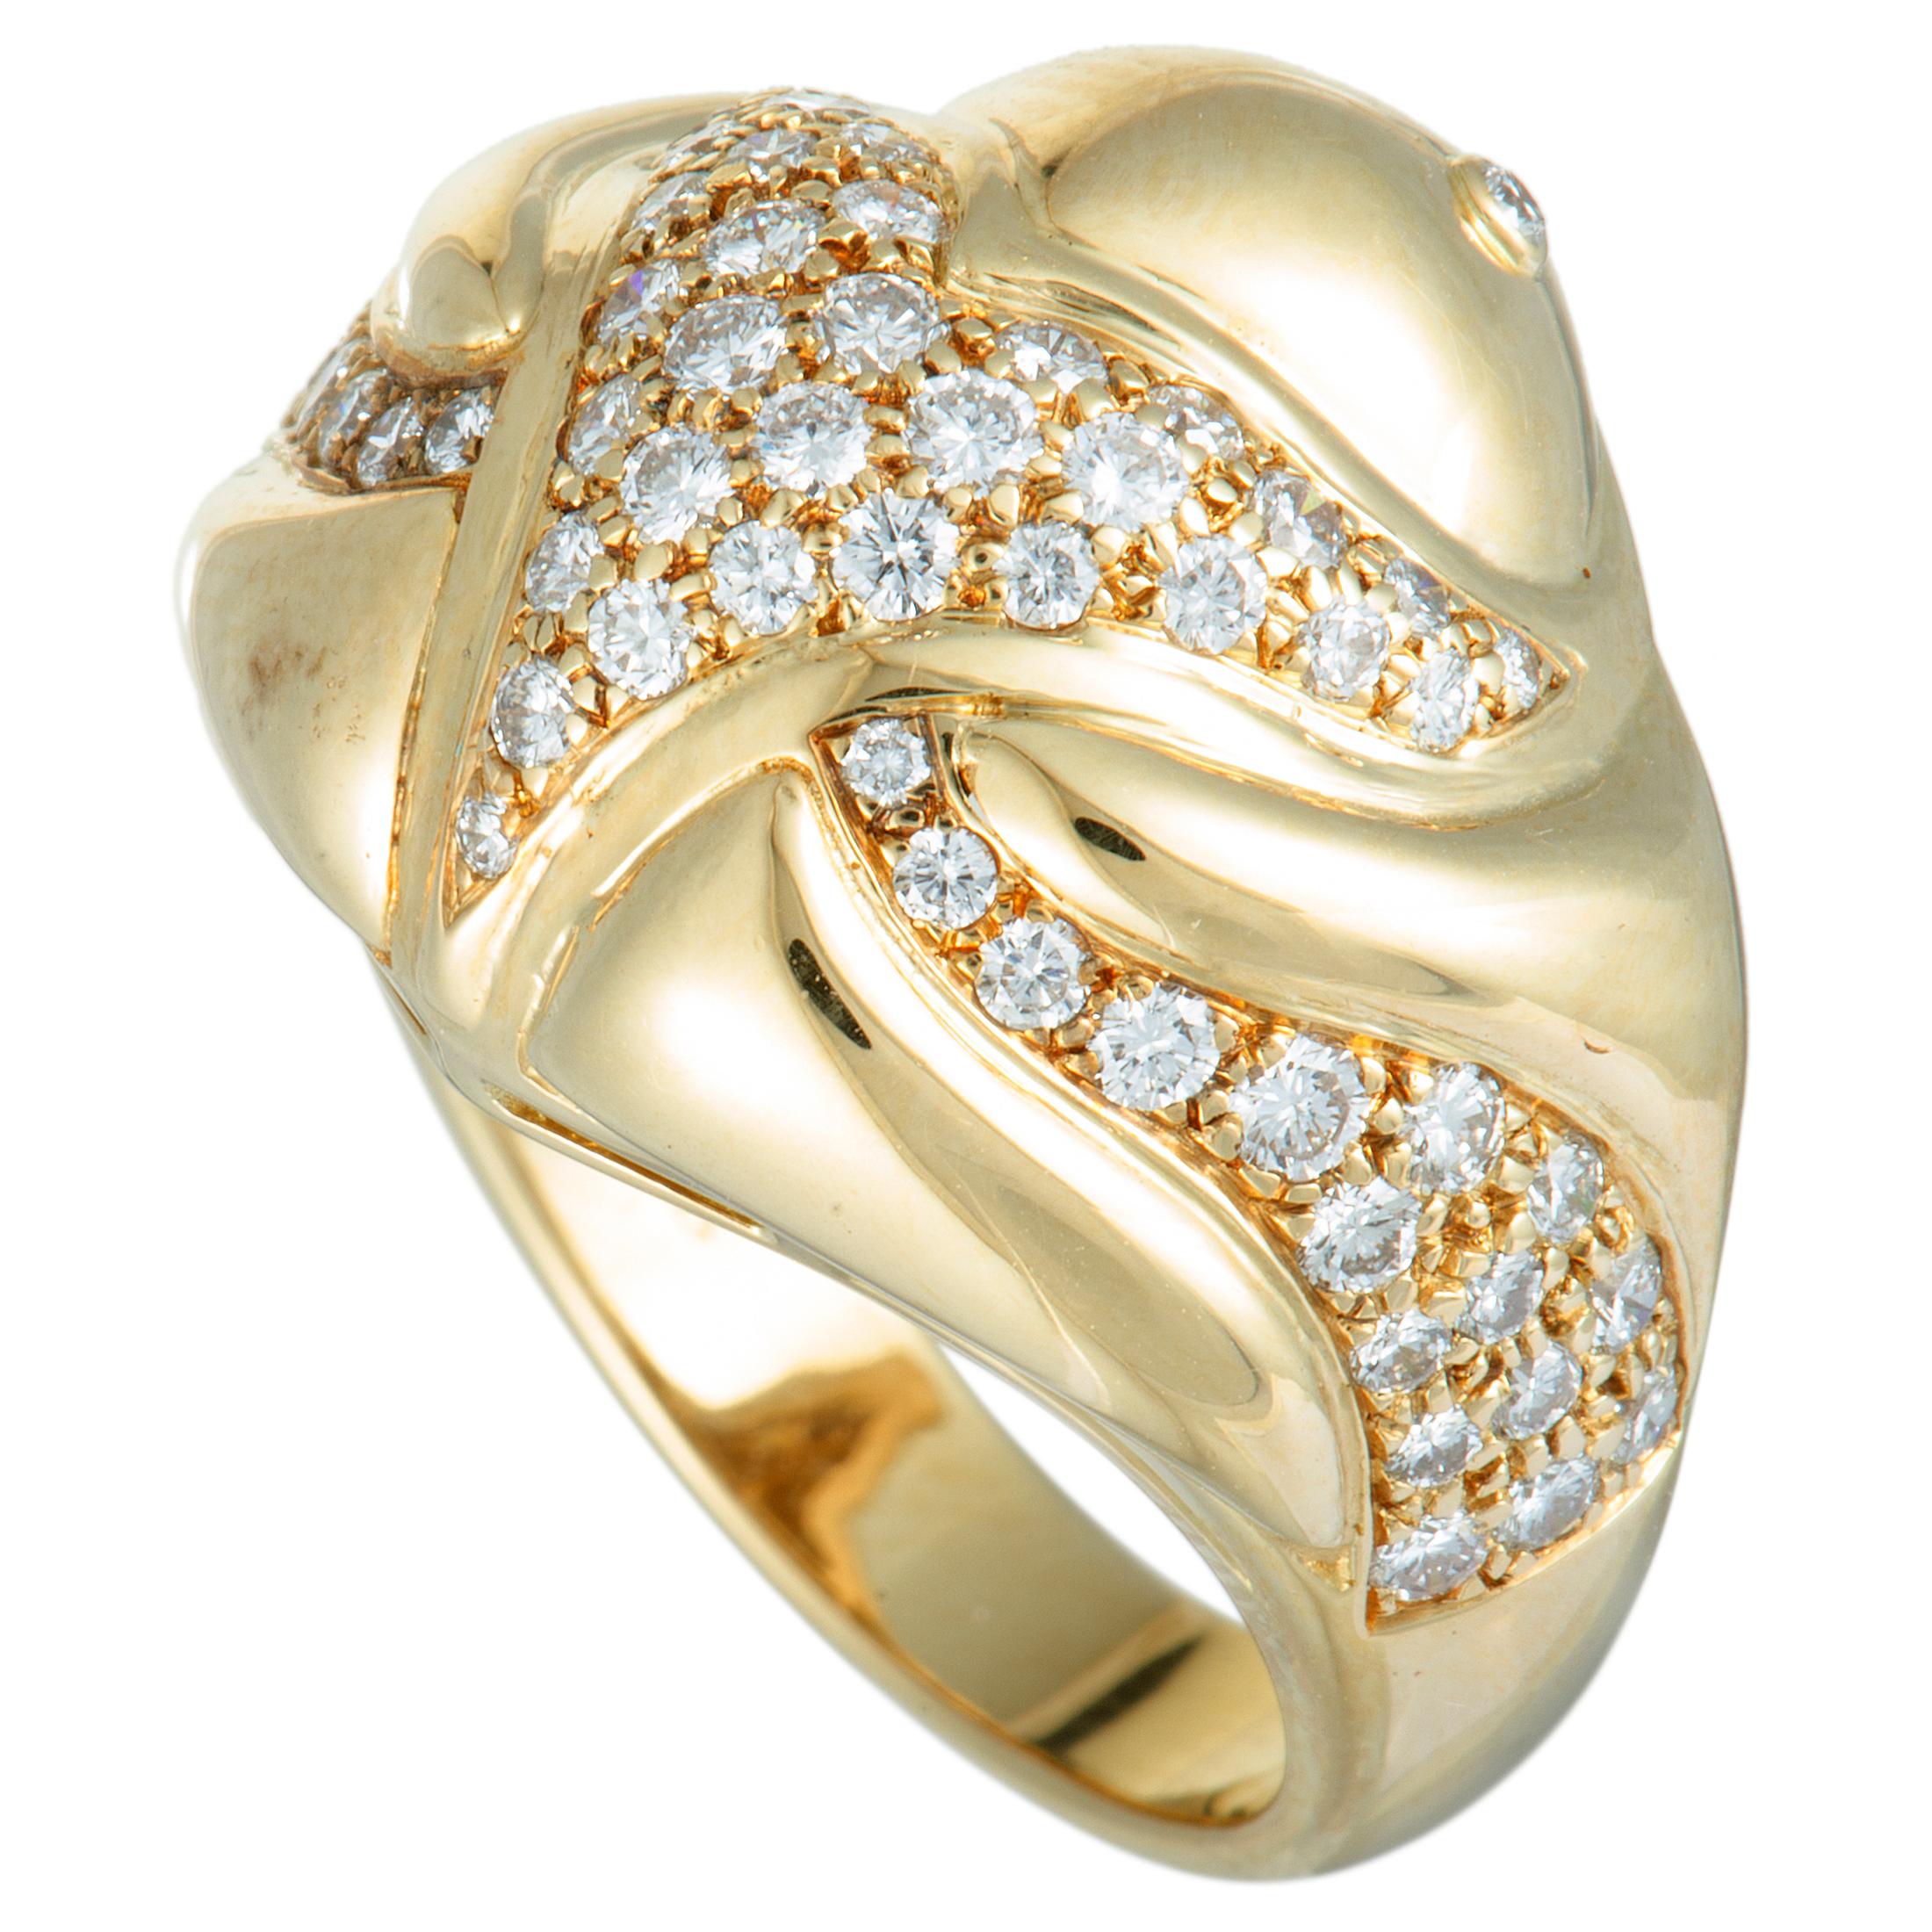 Beautifully set against the enchantingly radiant 18K yellow gold, the incredibly lustrous diamonds add to the compellingly luxurious appeal of this marvelous ring. The ring is wonderfully designed by Bvlgari and it is set with colorless (grade E)